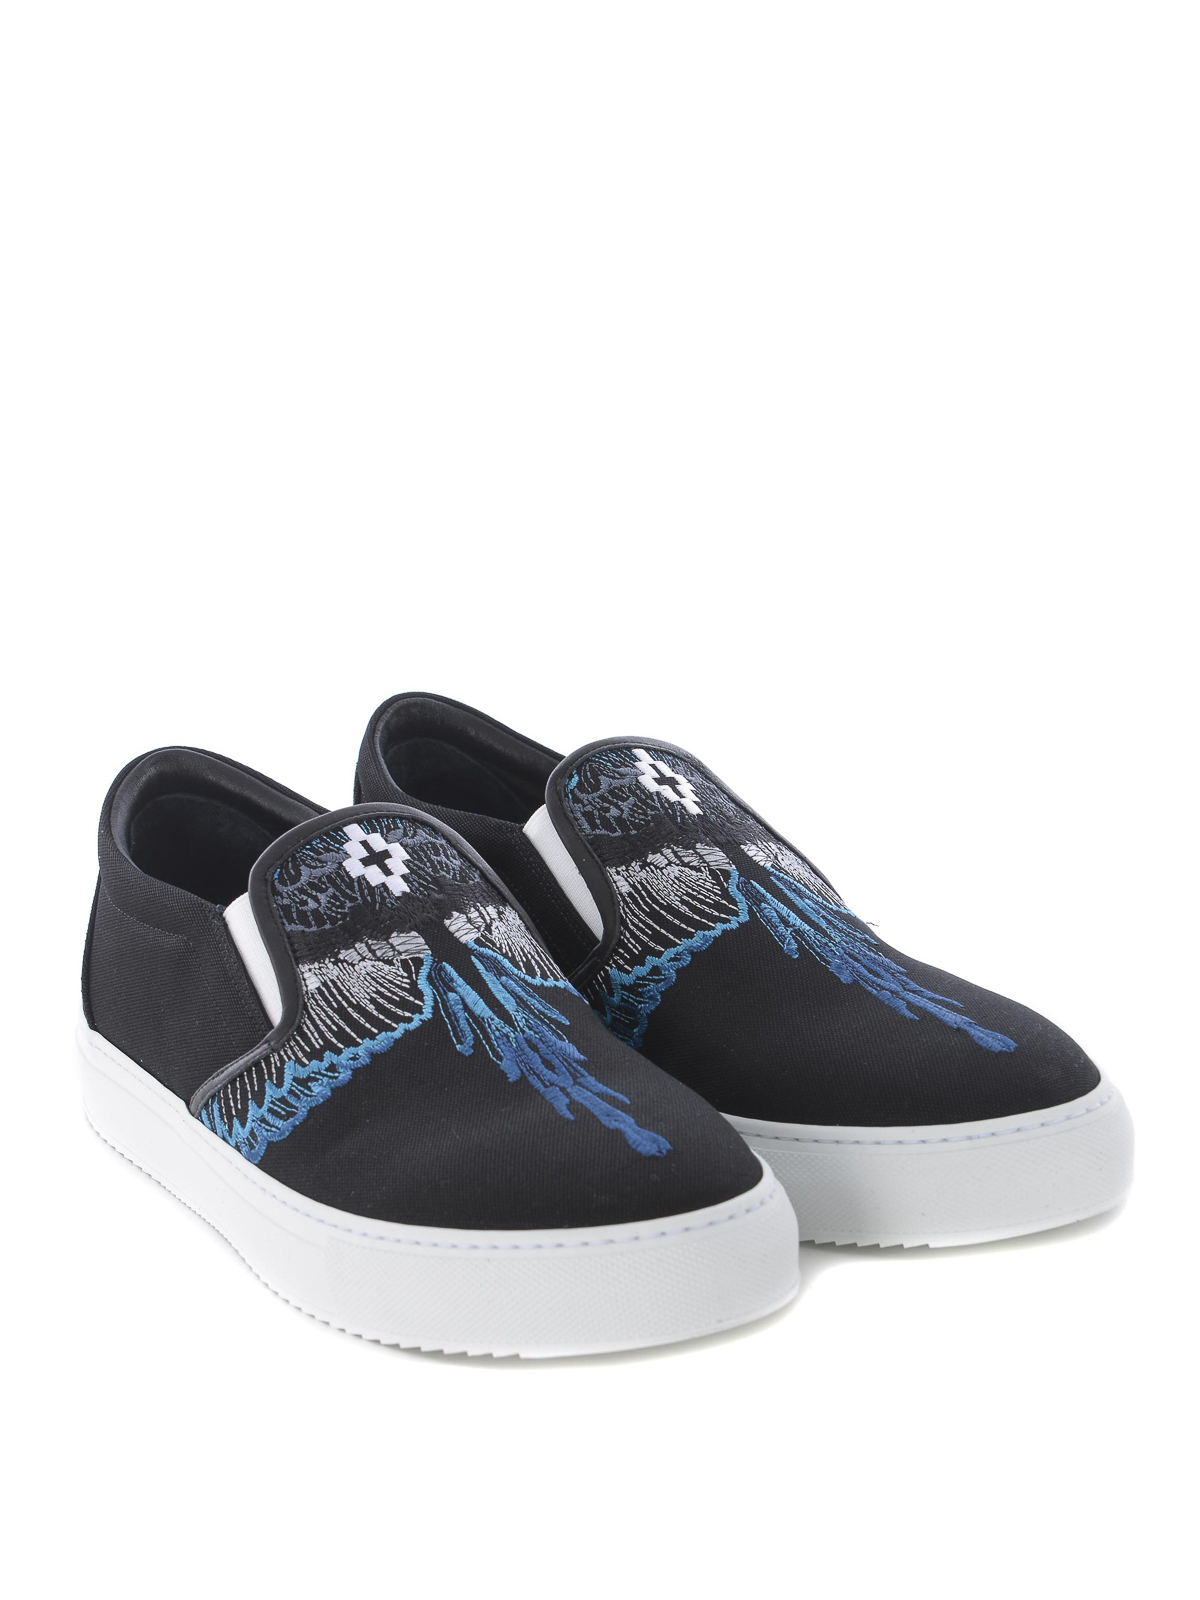 embroidered slip ons